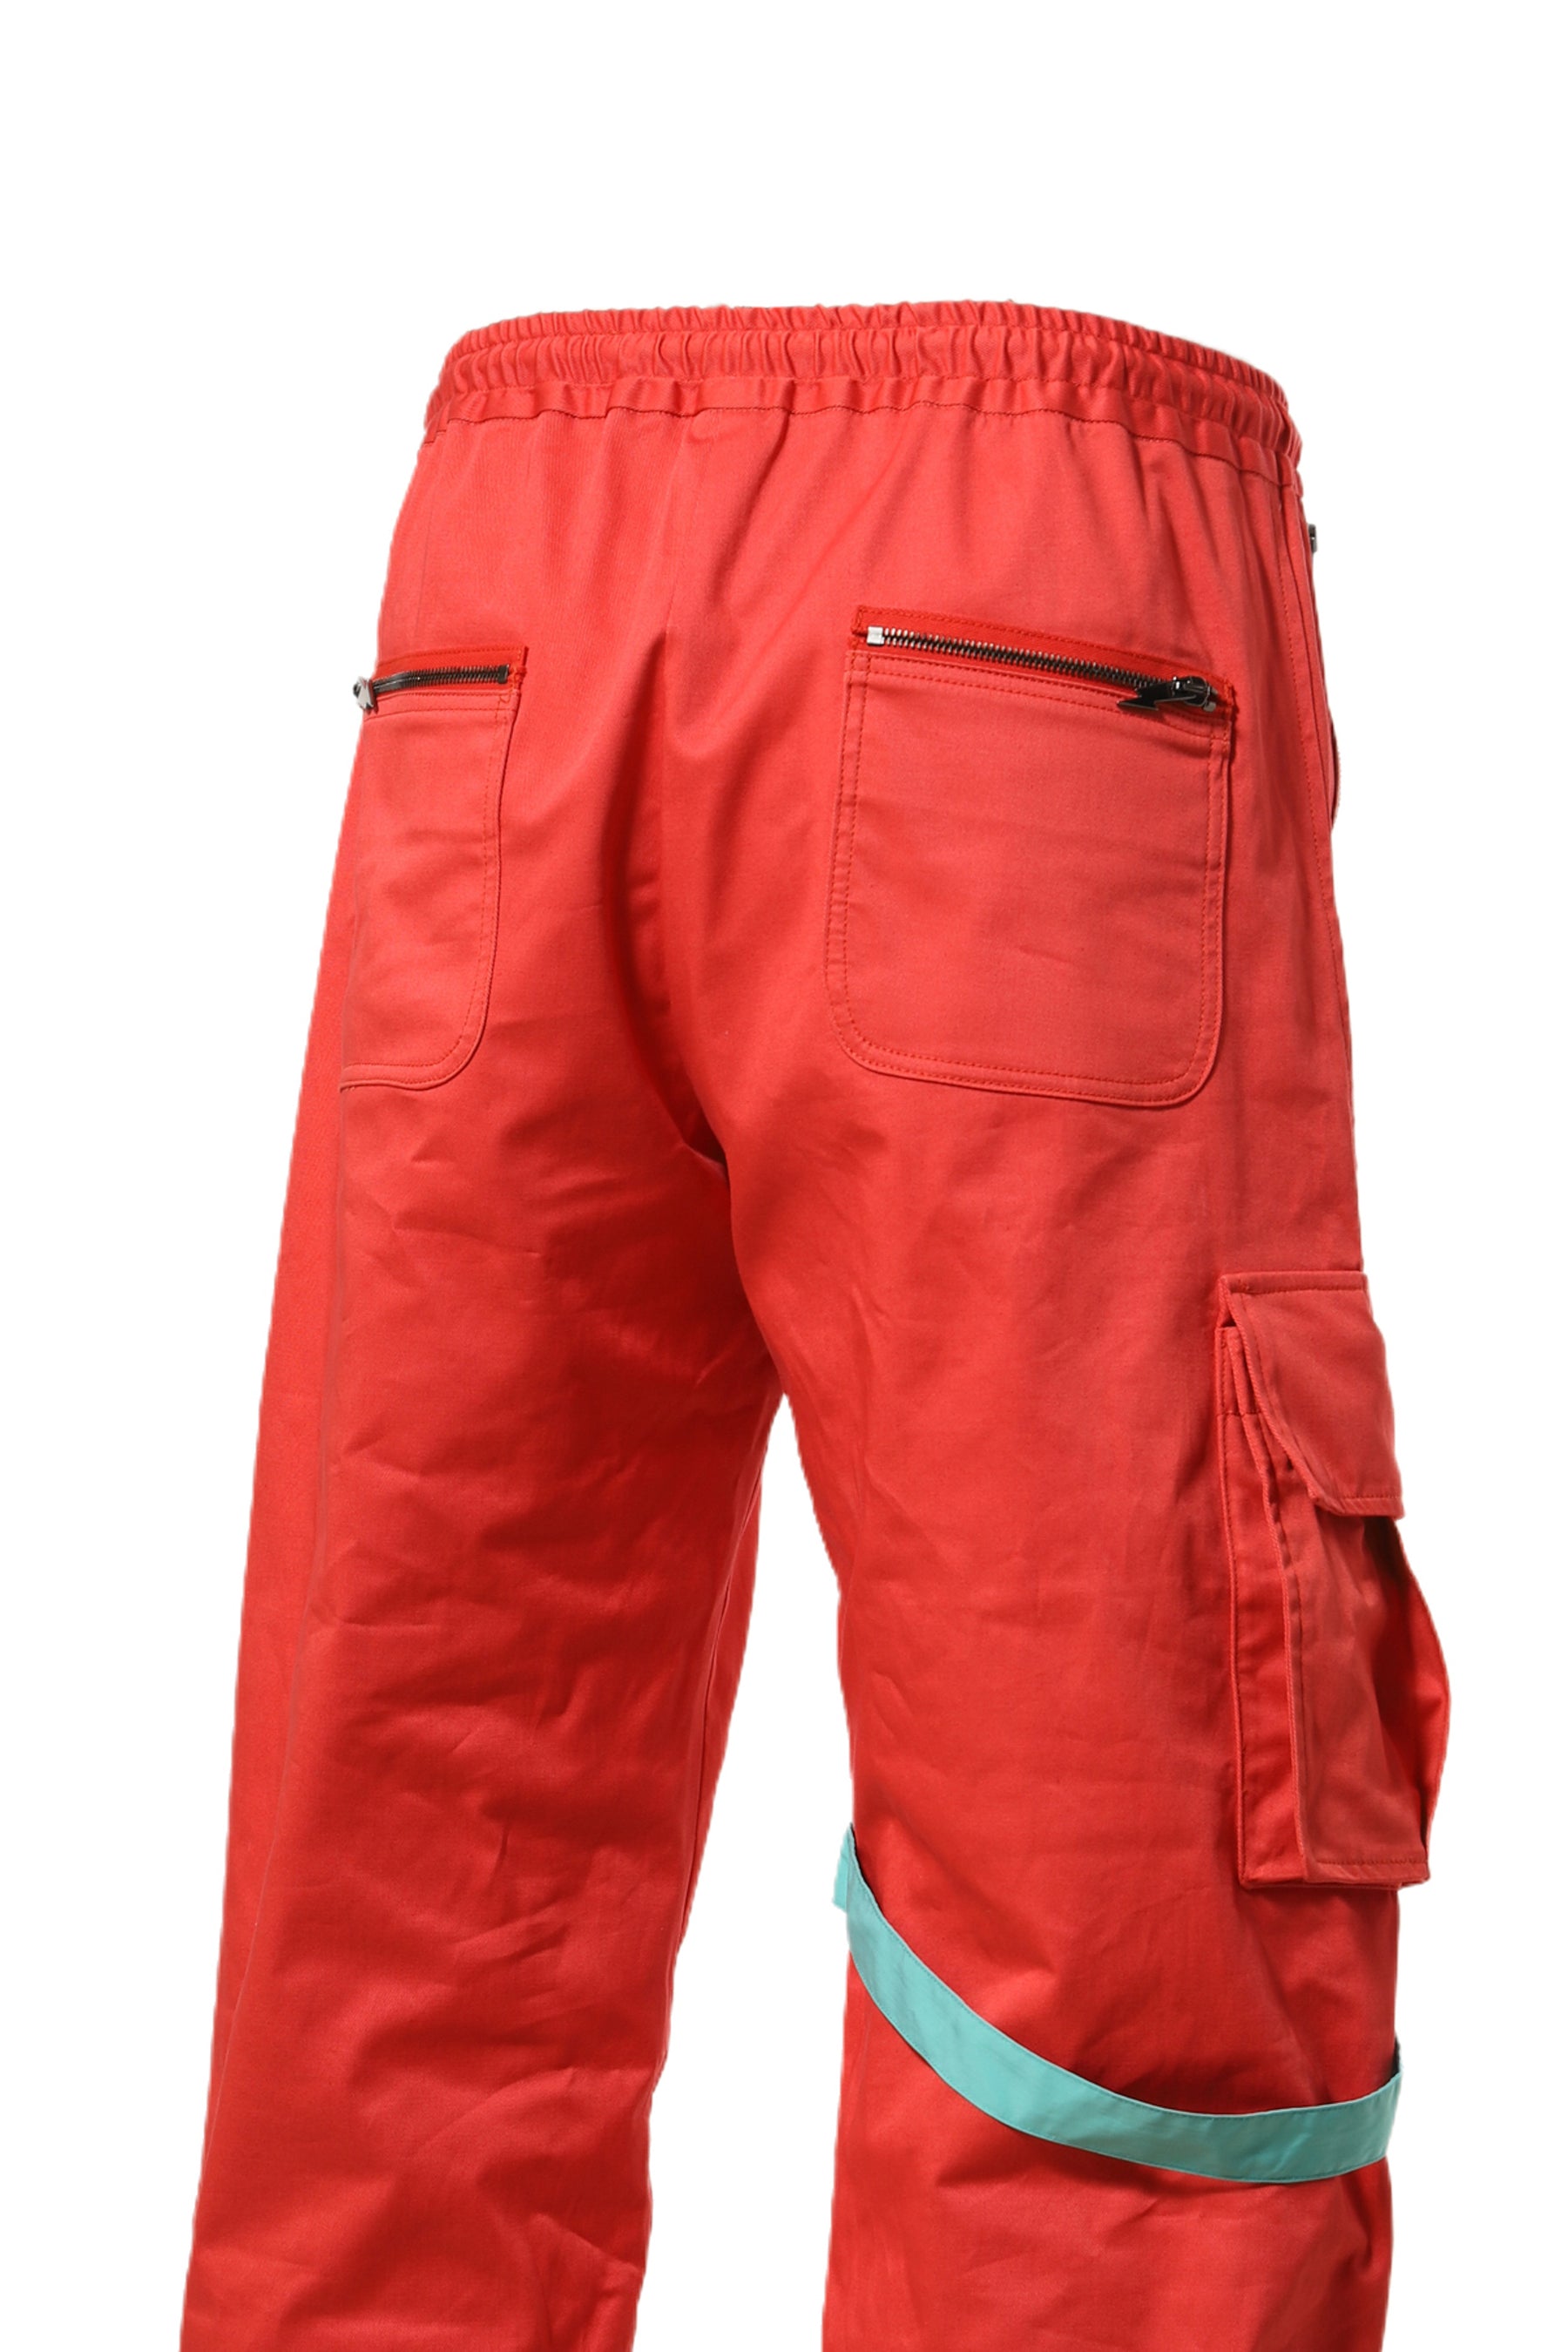 BAGGY TROUSERS / INFRARED/ORG